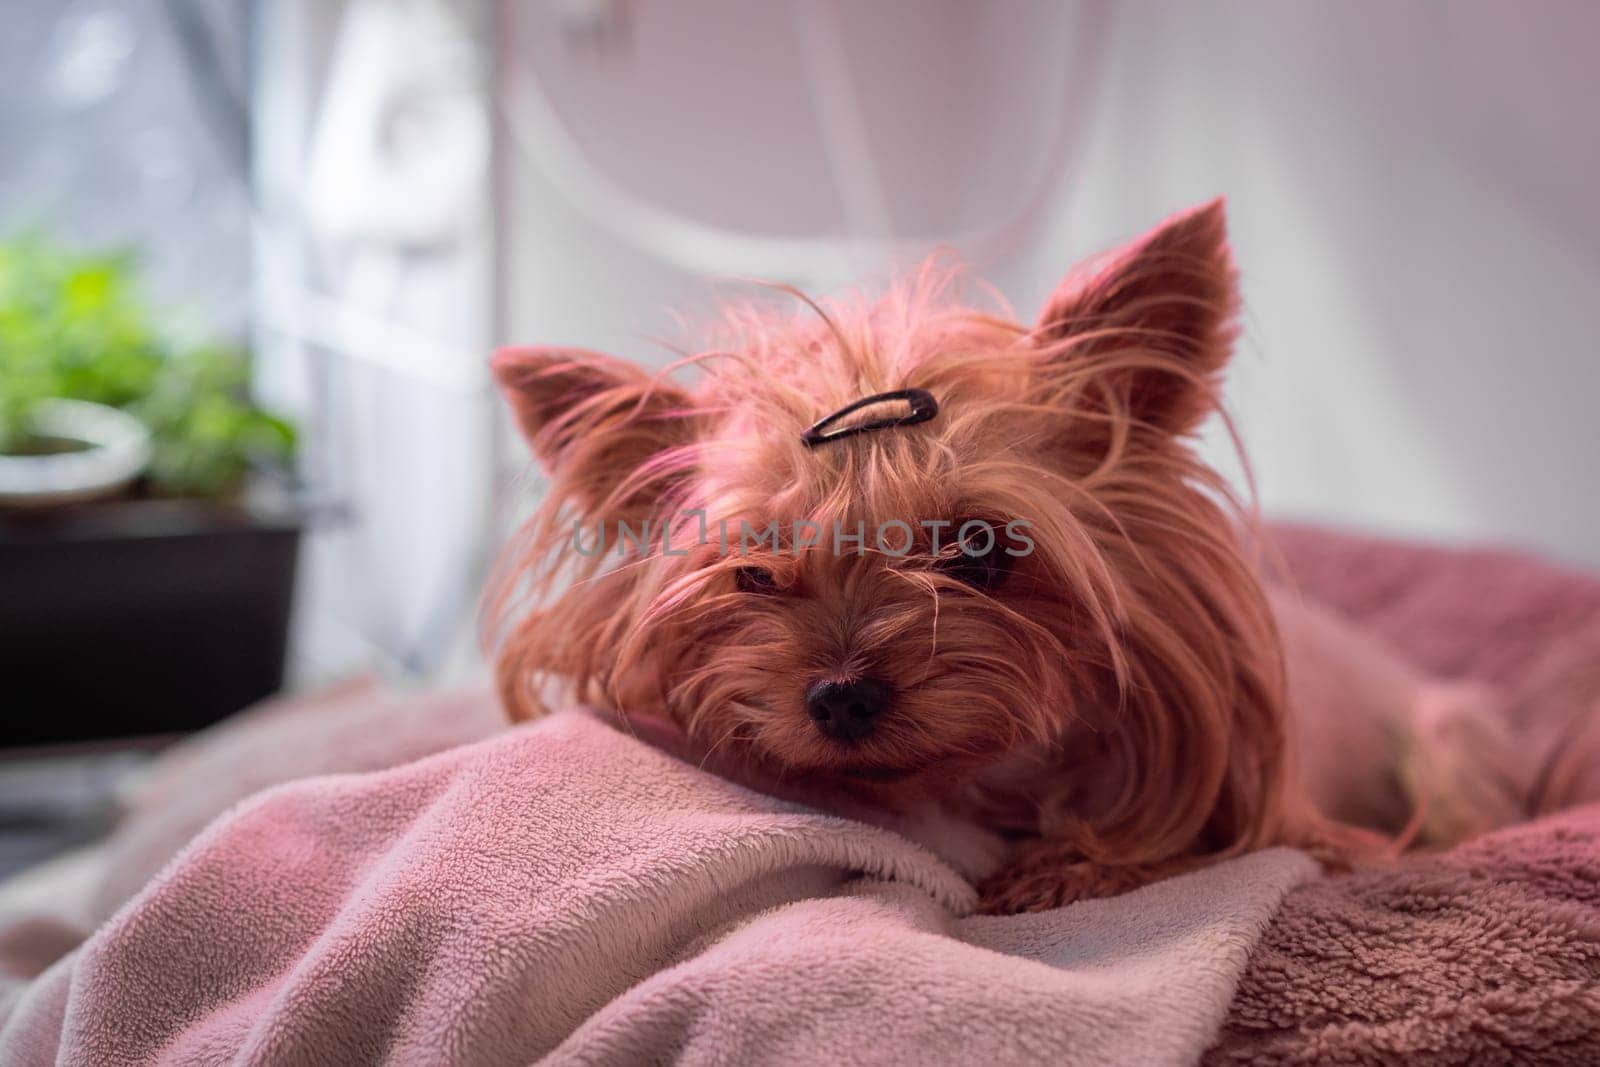 The Yorkshire Terrier dog is lying on the couch and resting. A beautiful pet dog.